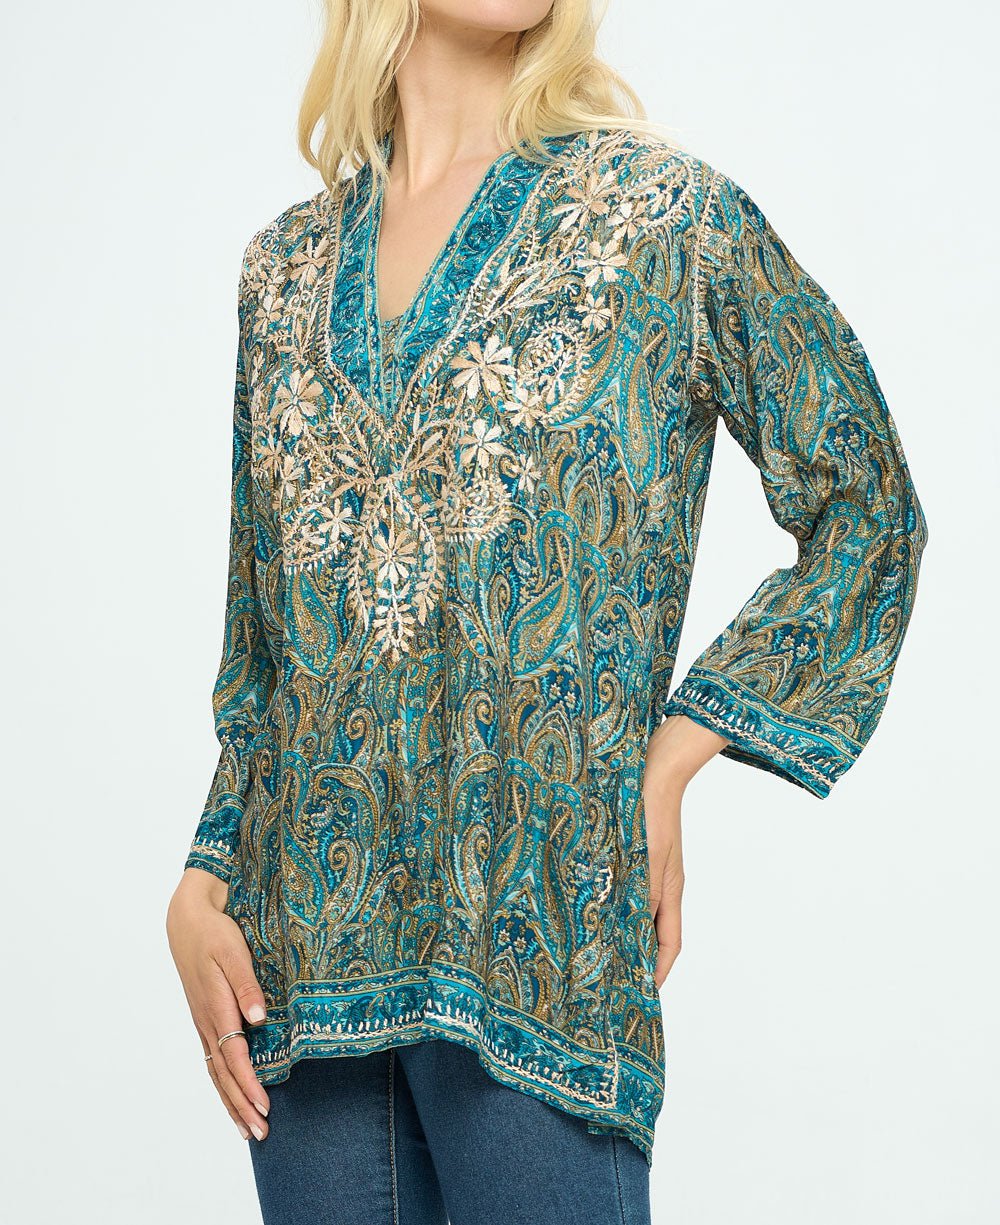 Embroidered Green Gardens V Neck Tunic Top - Shirts & Tops S